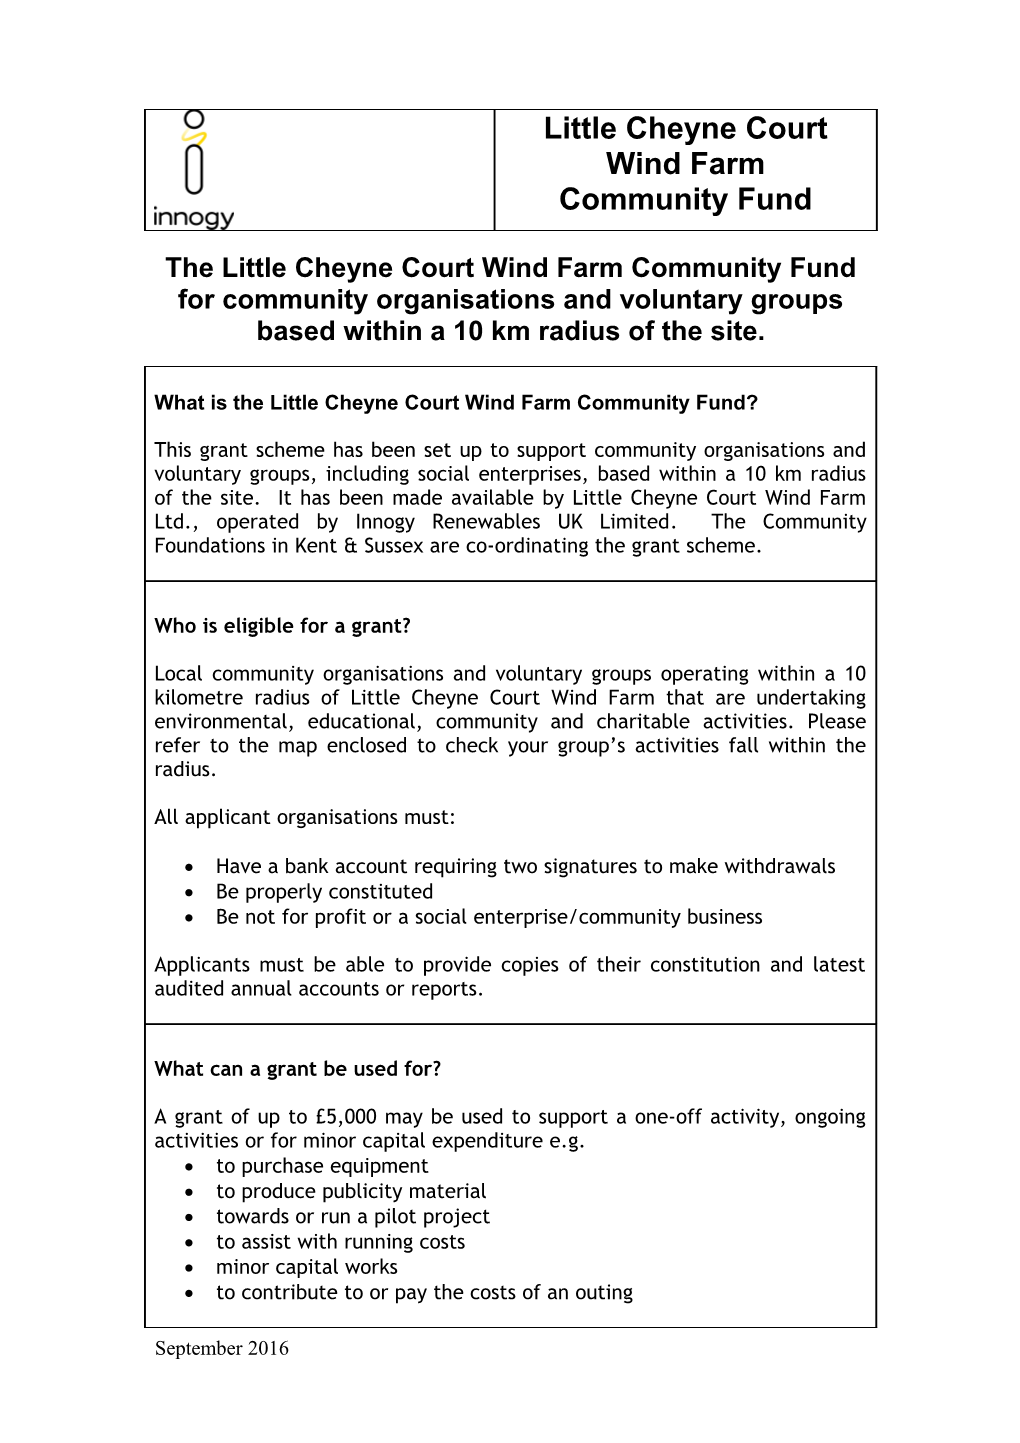 The Little Cheyne Court Wind Farm Community Fund for Community Organisations and Voluntary s1